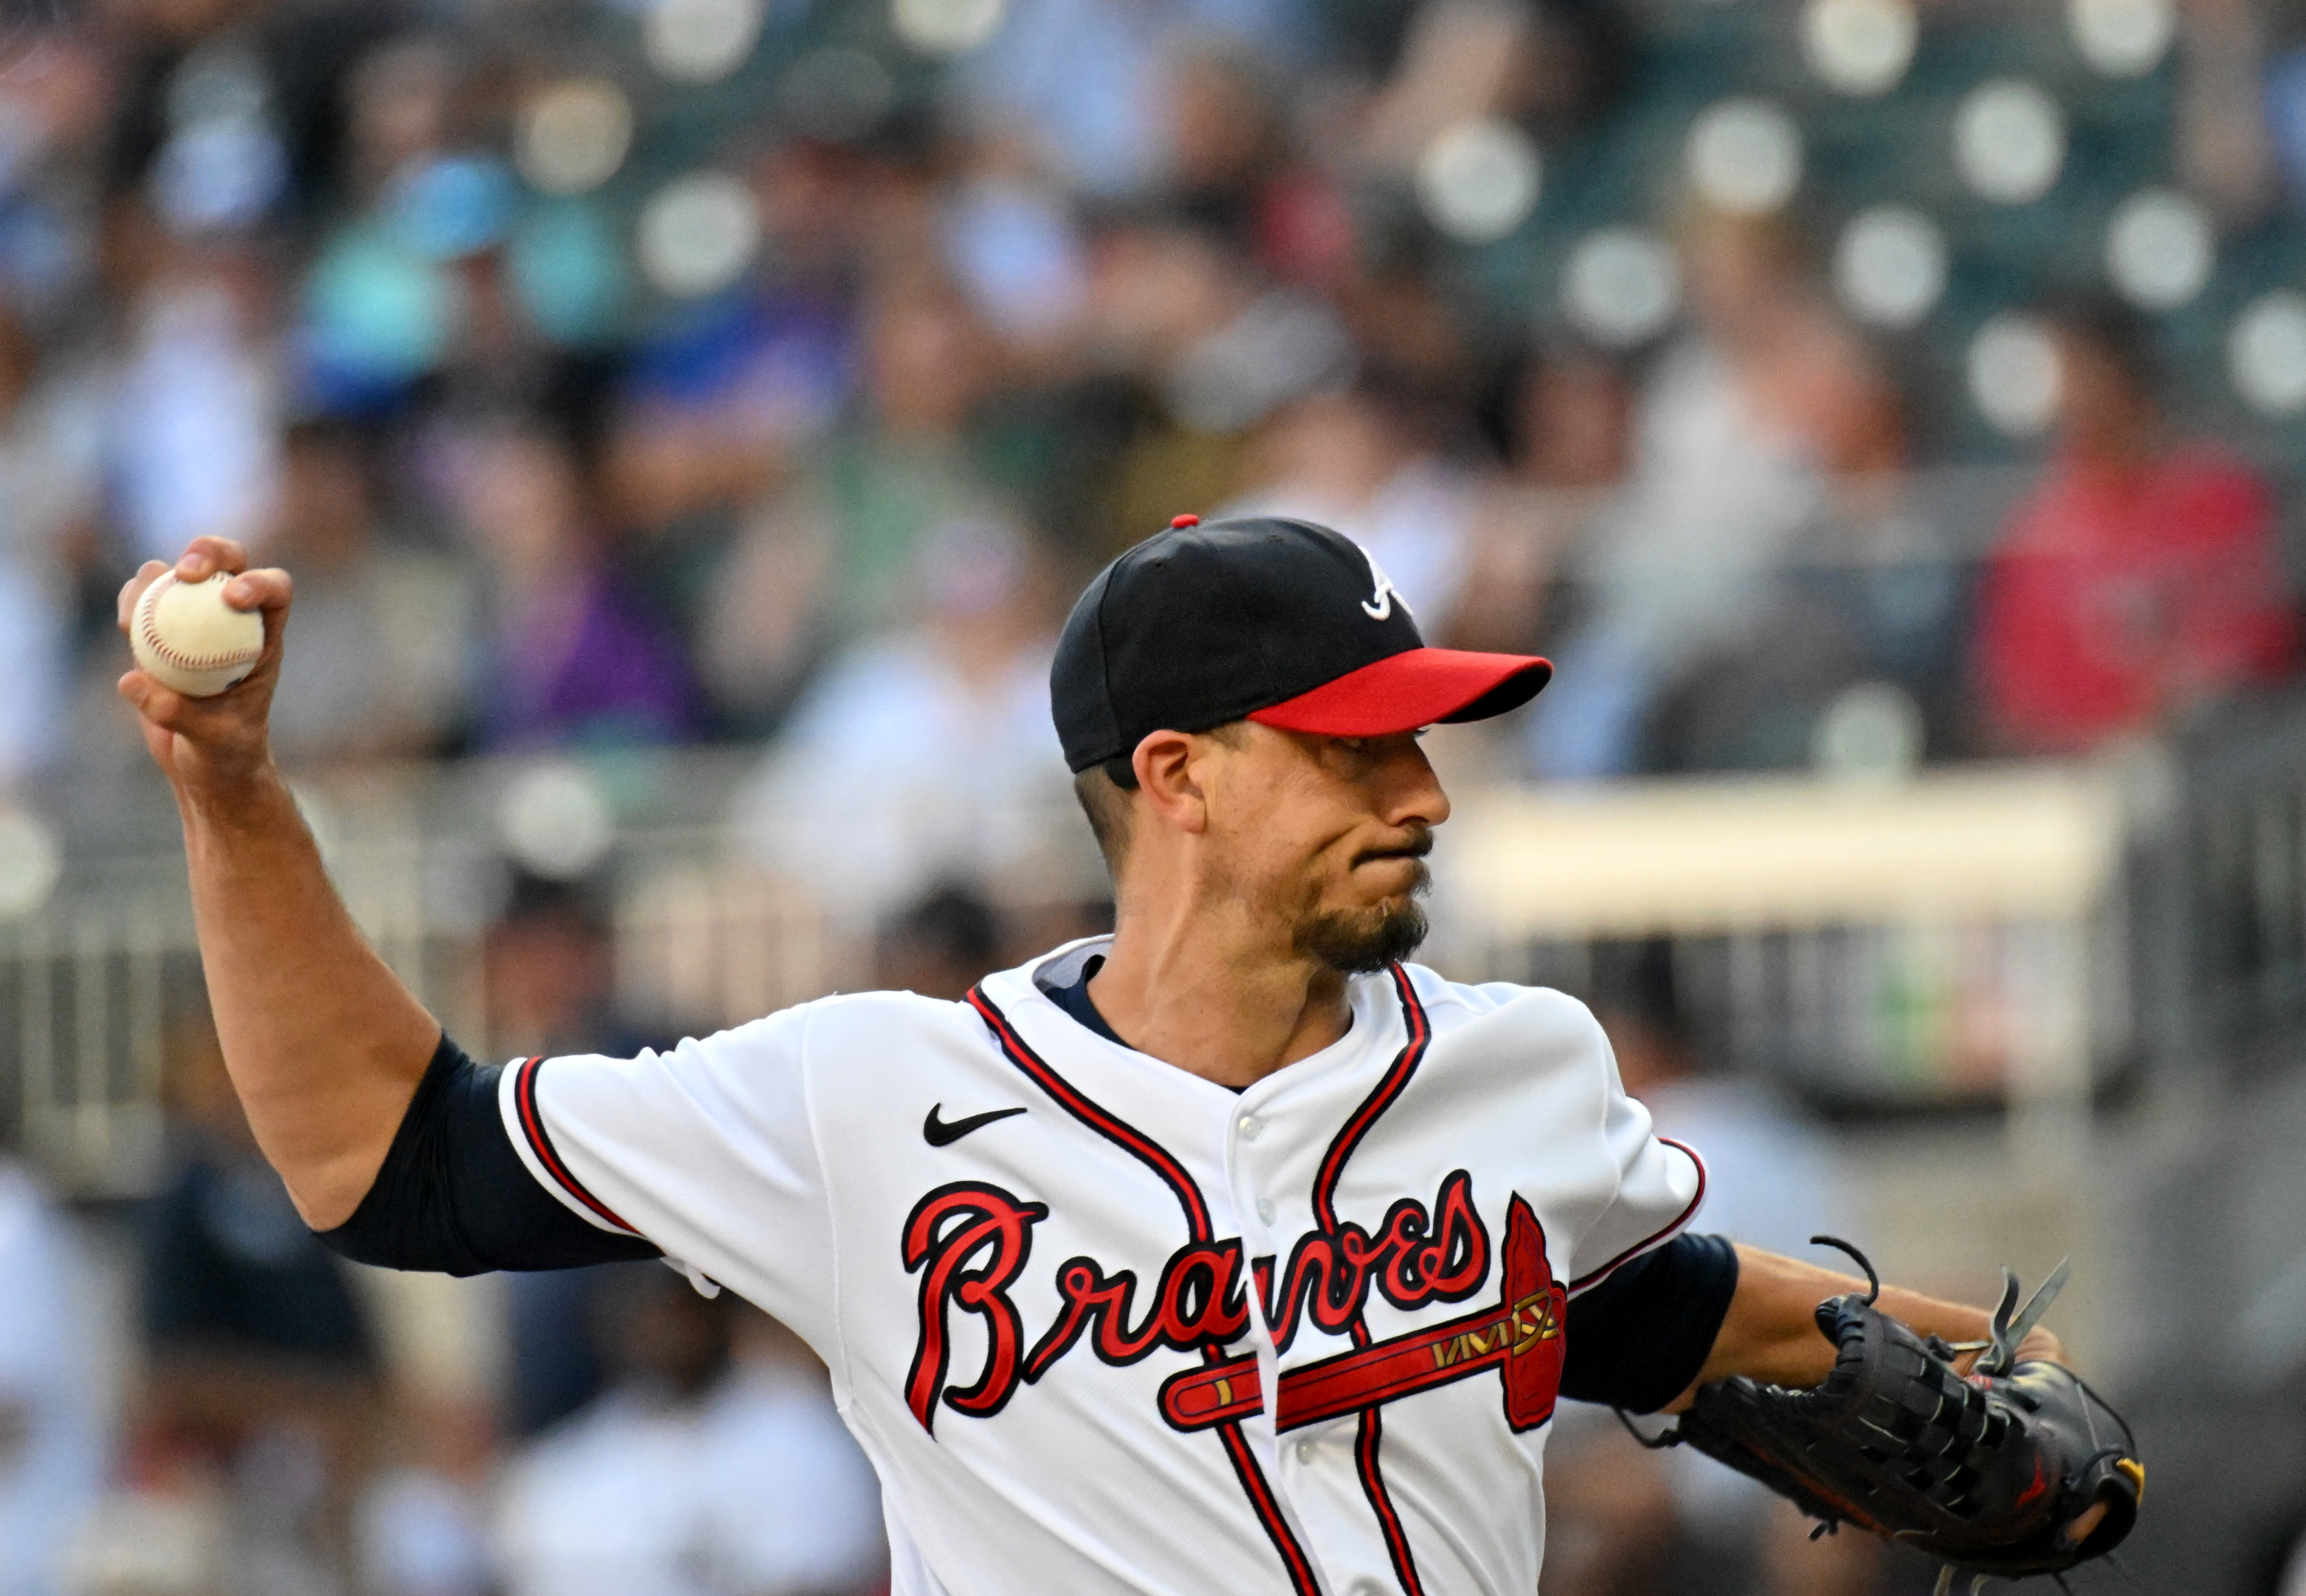 Morton strikes out 10, leaves Yankees with losing record as Braves